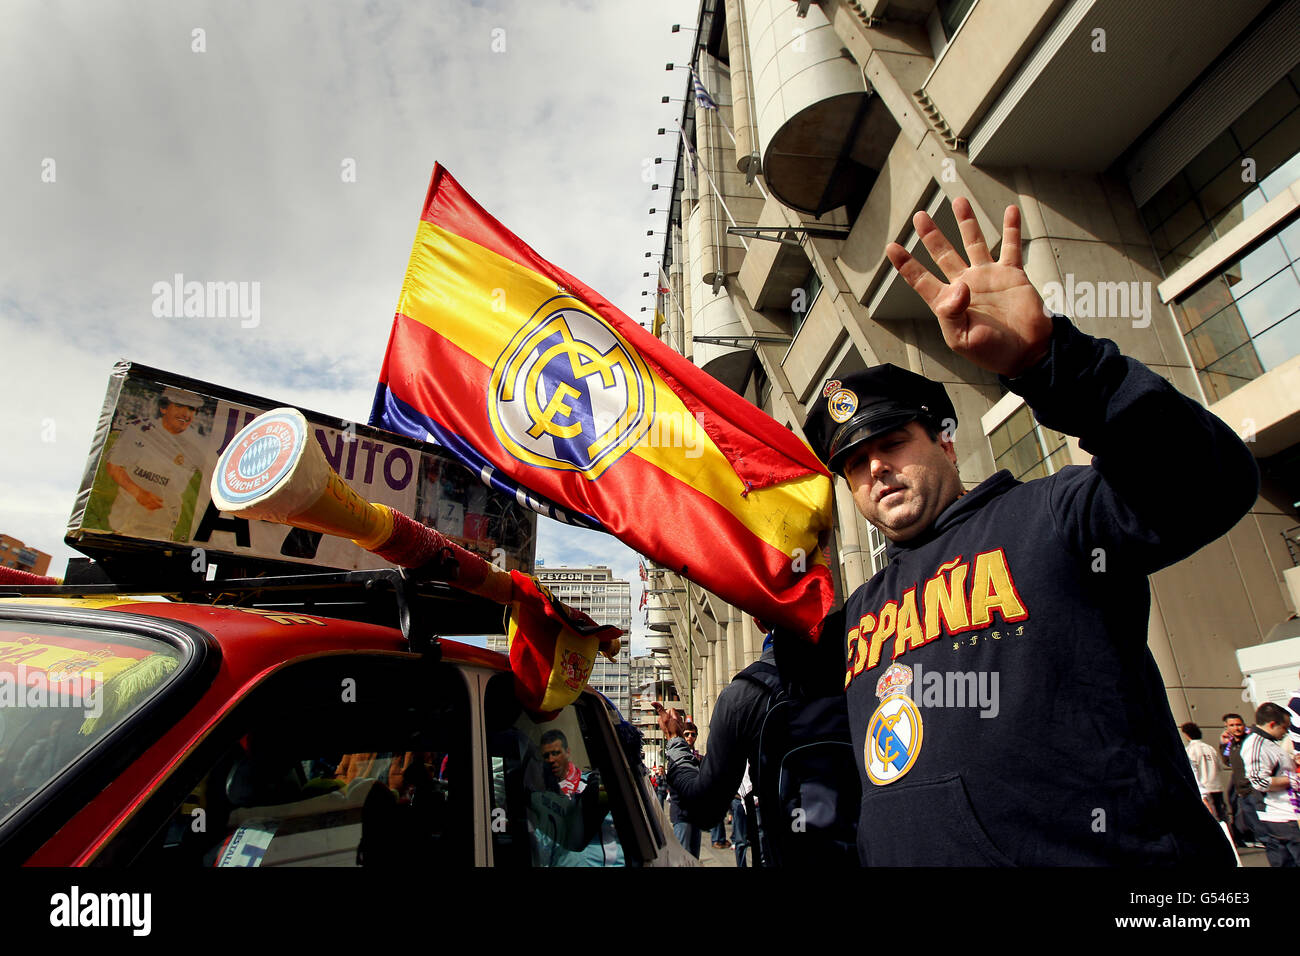 Soccer - UEFA Champions League - Semi Final - Second Leg - Real Madrid v Bayern Munich - Santiago Bernabeu. A Real Madrid fan outside the Santiago Bernabeu stadium before the match with his decorated car in club colours Stock Photo